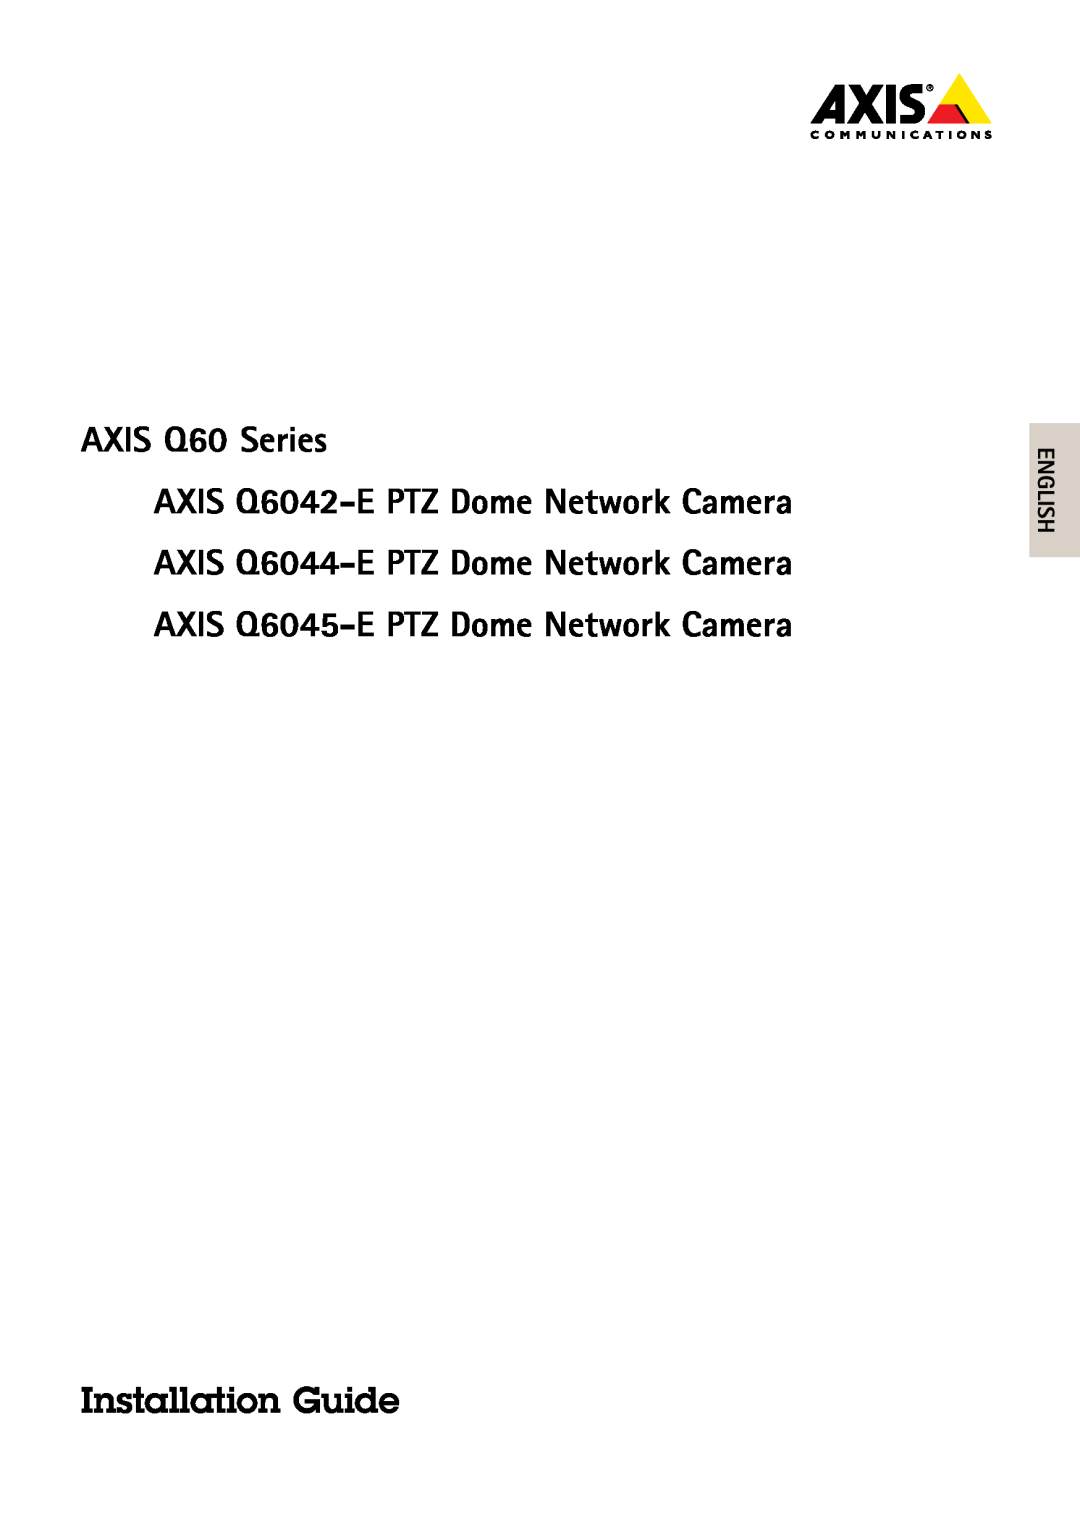 Axis Communications user manual AXIS Q6045-EMk II PTZ Dome Network Camera 